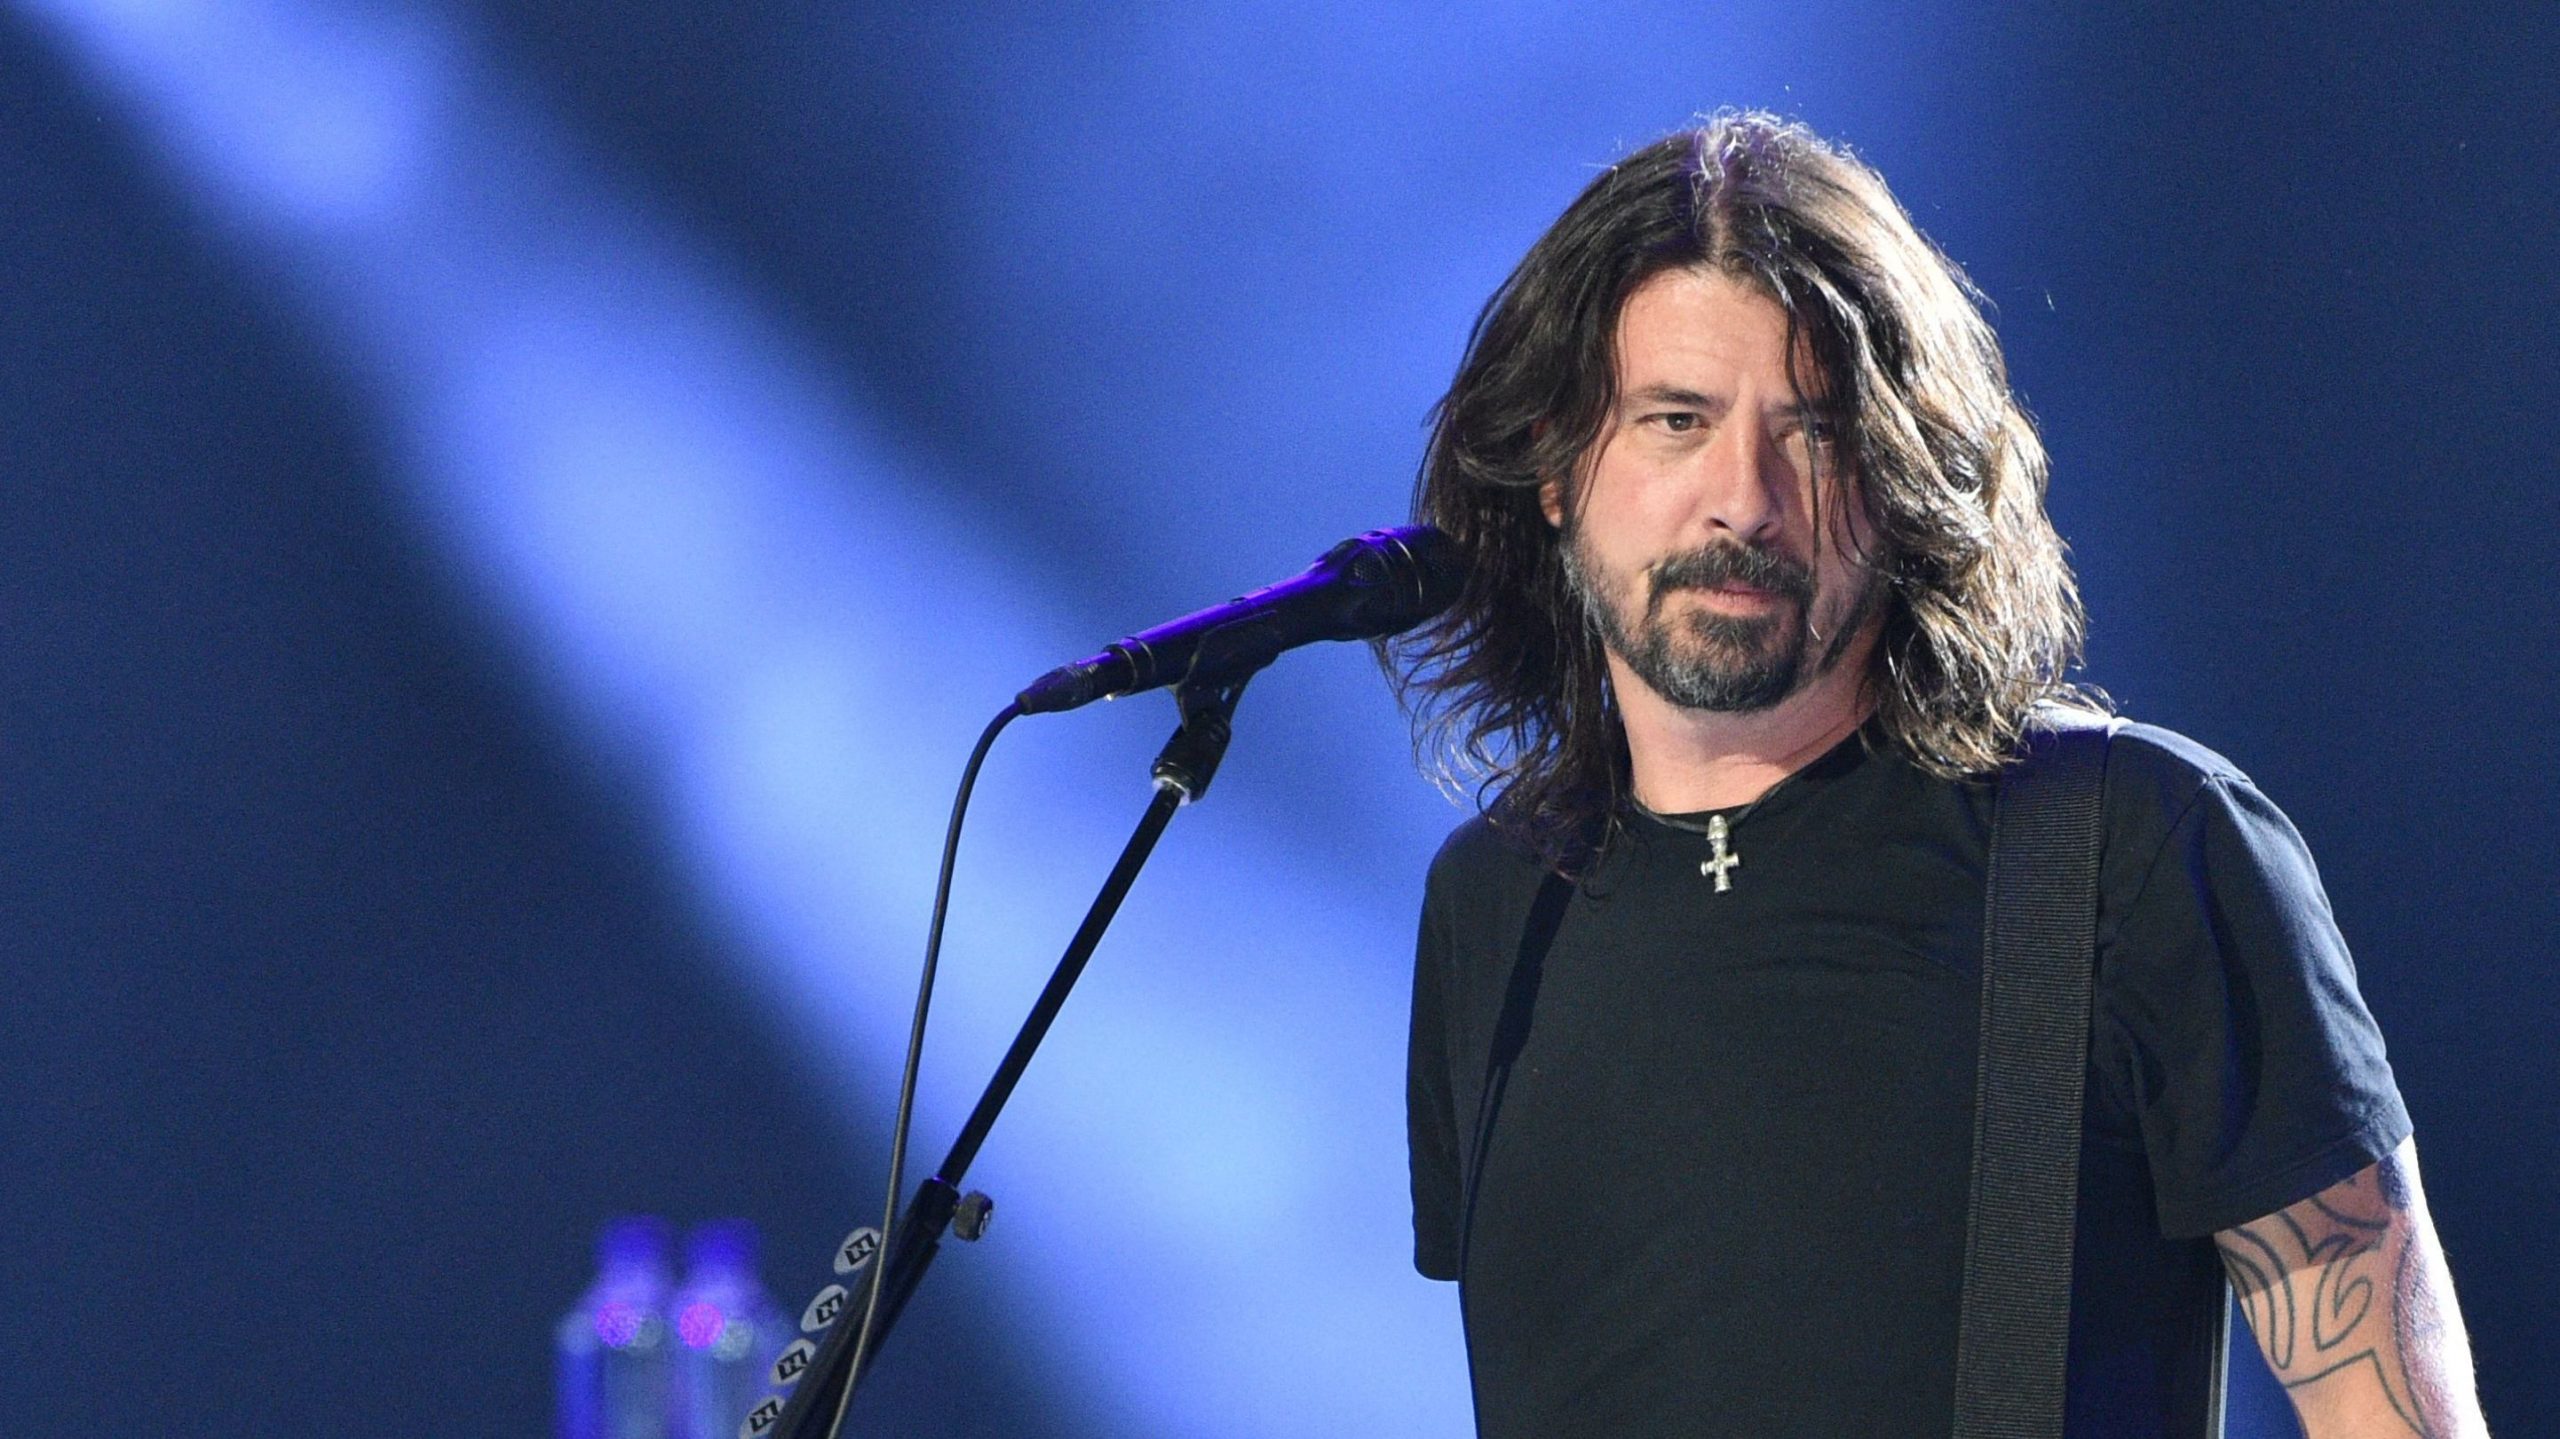 Dave Grohl Biography: Age, Wife, Height, Children, Parents, Family, Siblings, Wiki